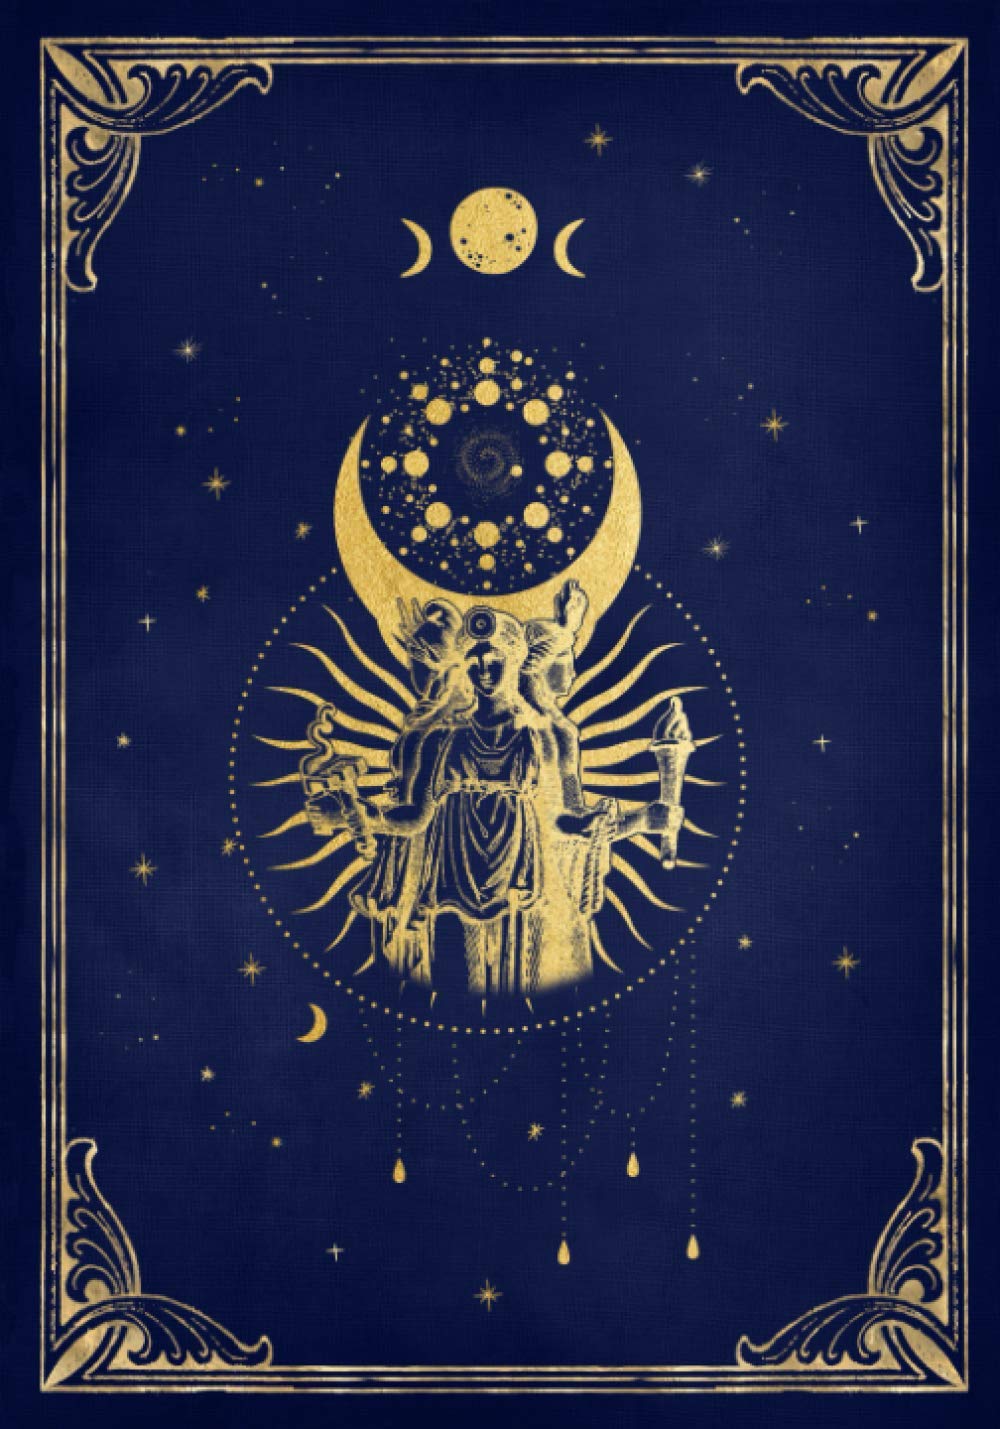 Blank Hecate Triple Goddess Grimoire, A Dot Grid Journal For Book Of Shadows: For Solitary Witches, Wiccans And Pagans To Record Spells, Rituals, Mantras, Etc.: The Apollo Book: 9798727889107: Books